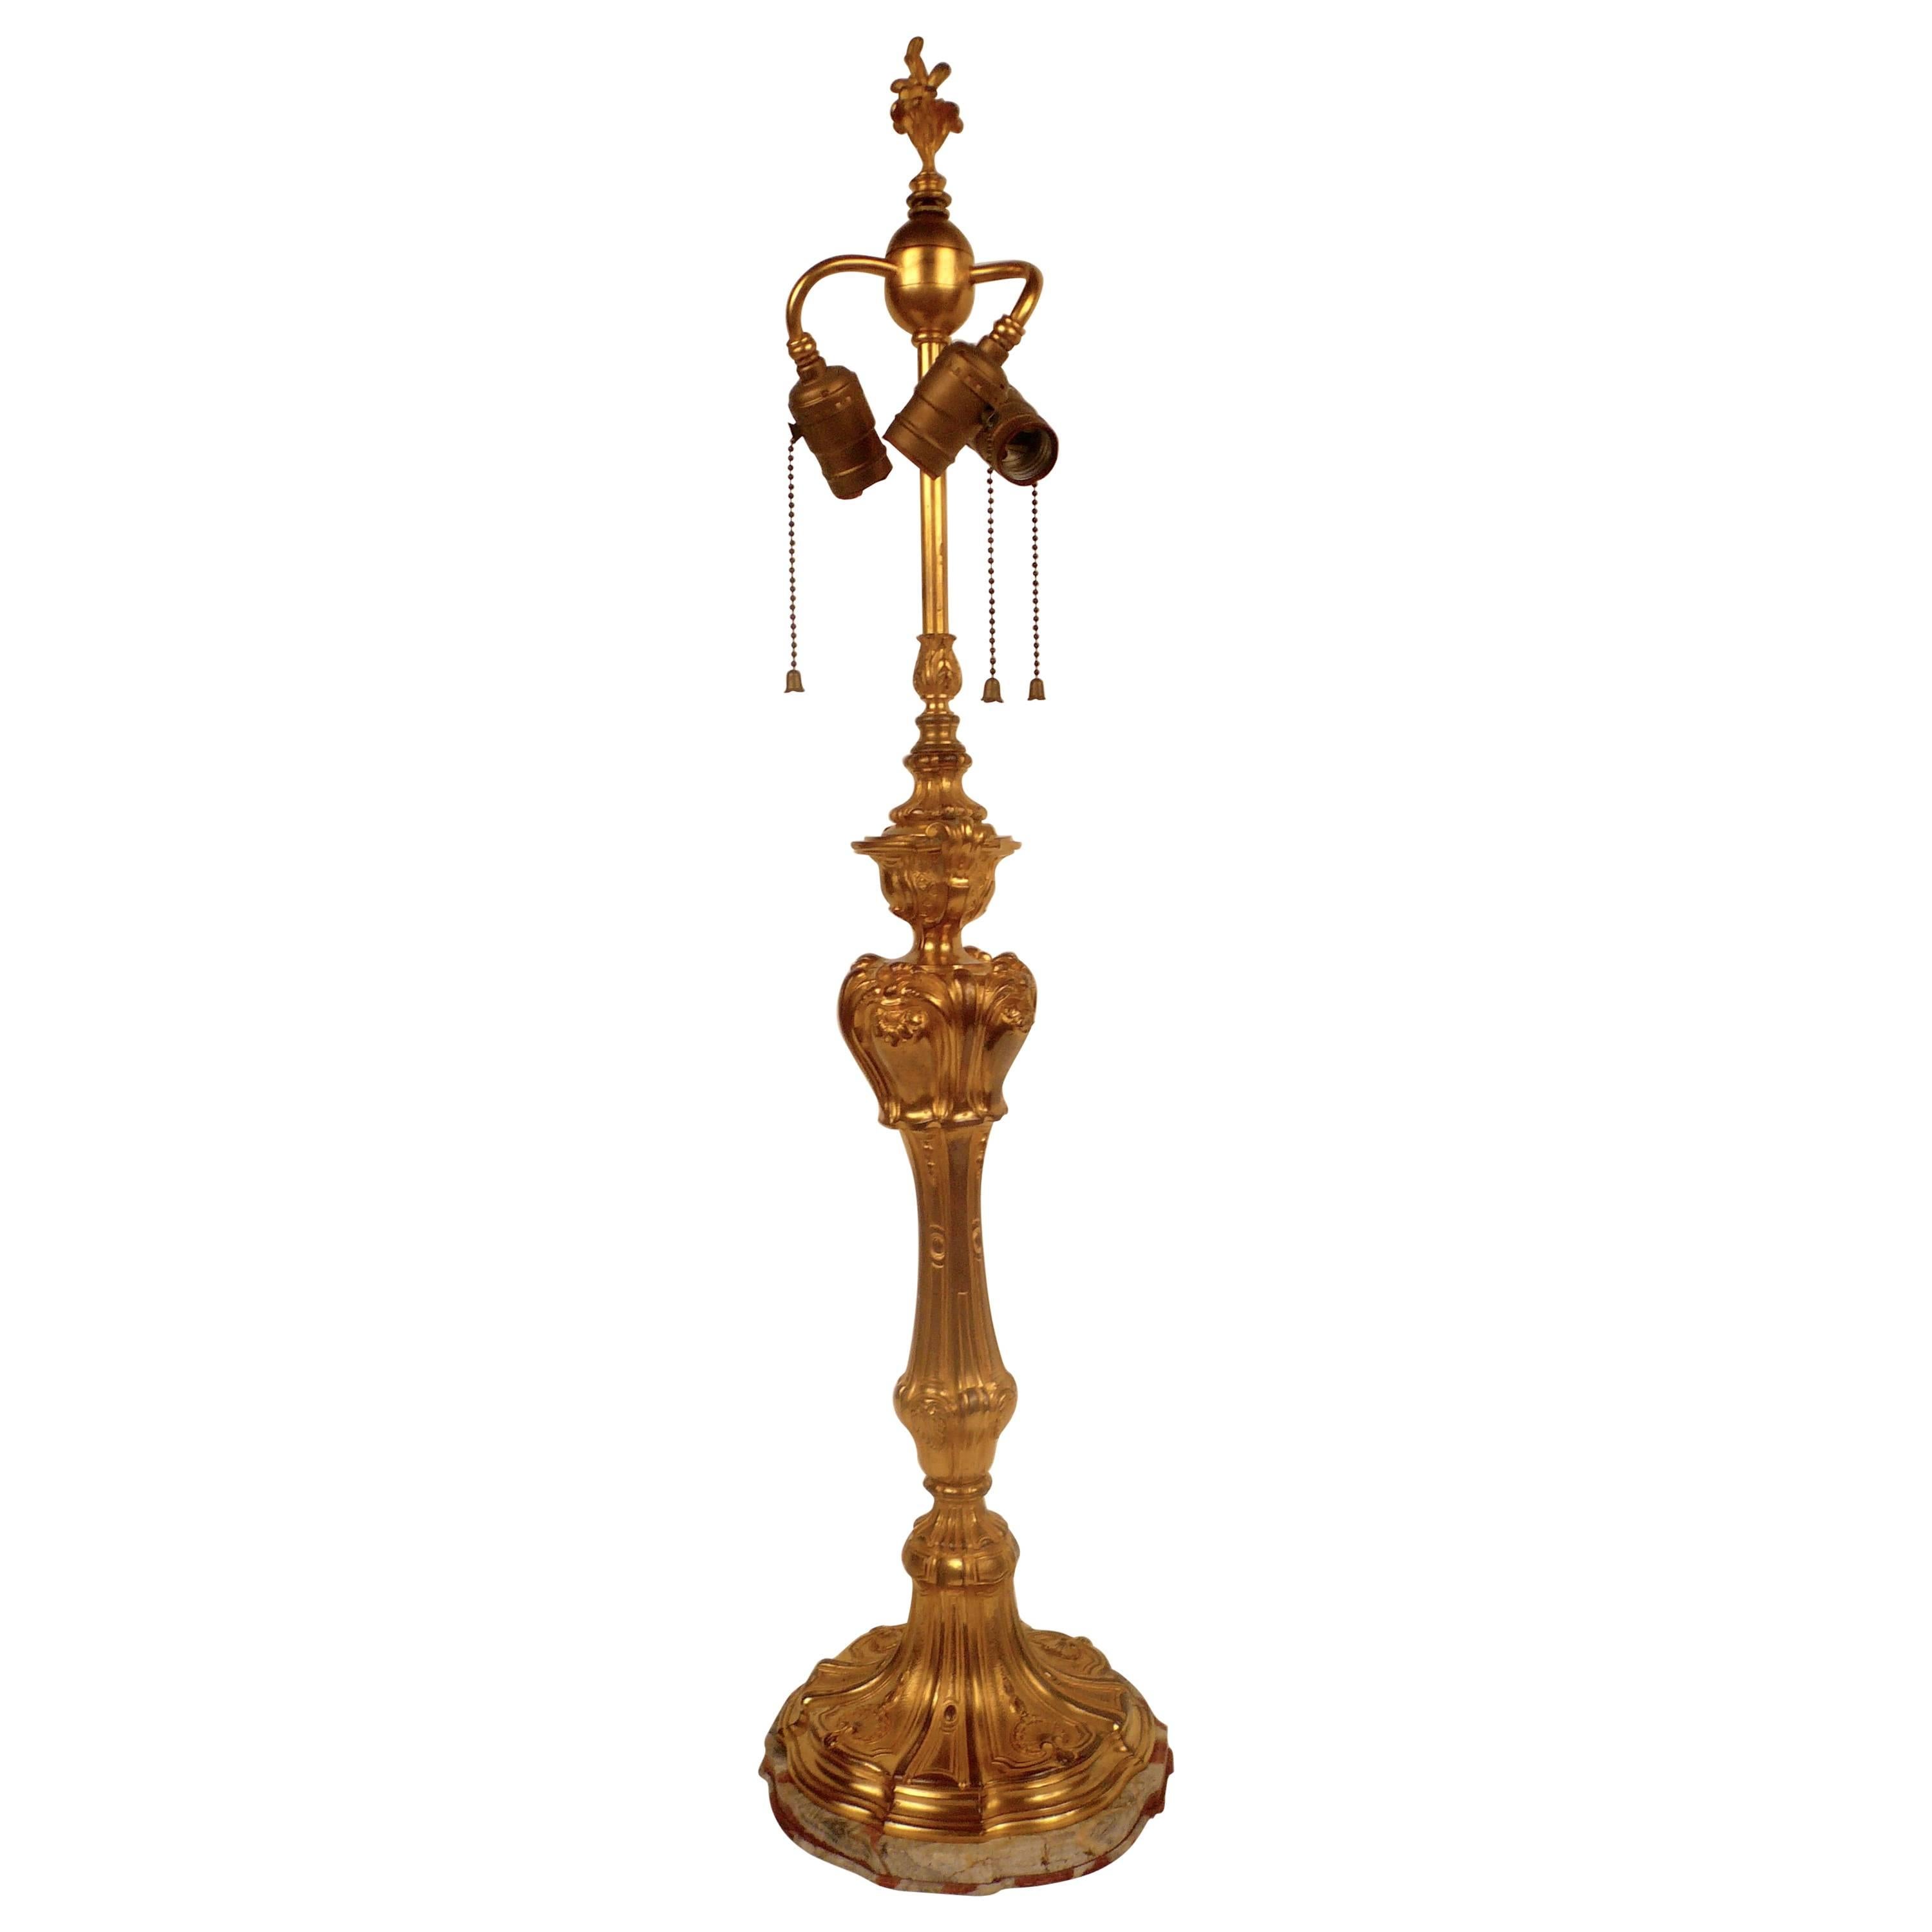 Edward F. Caldwell Gilt Bronze and Marble Table Lamp